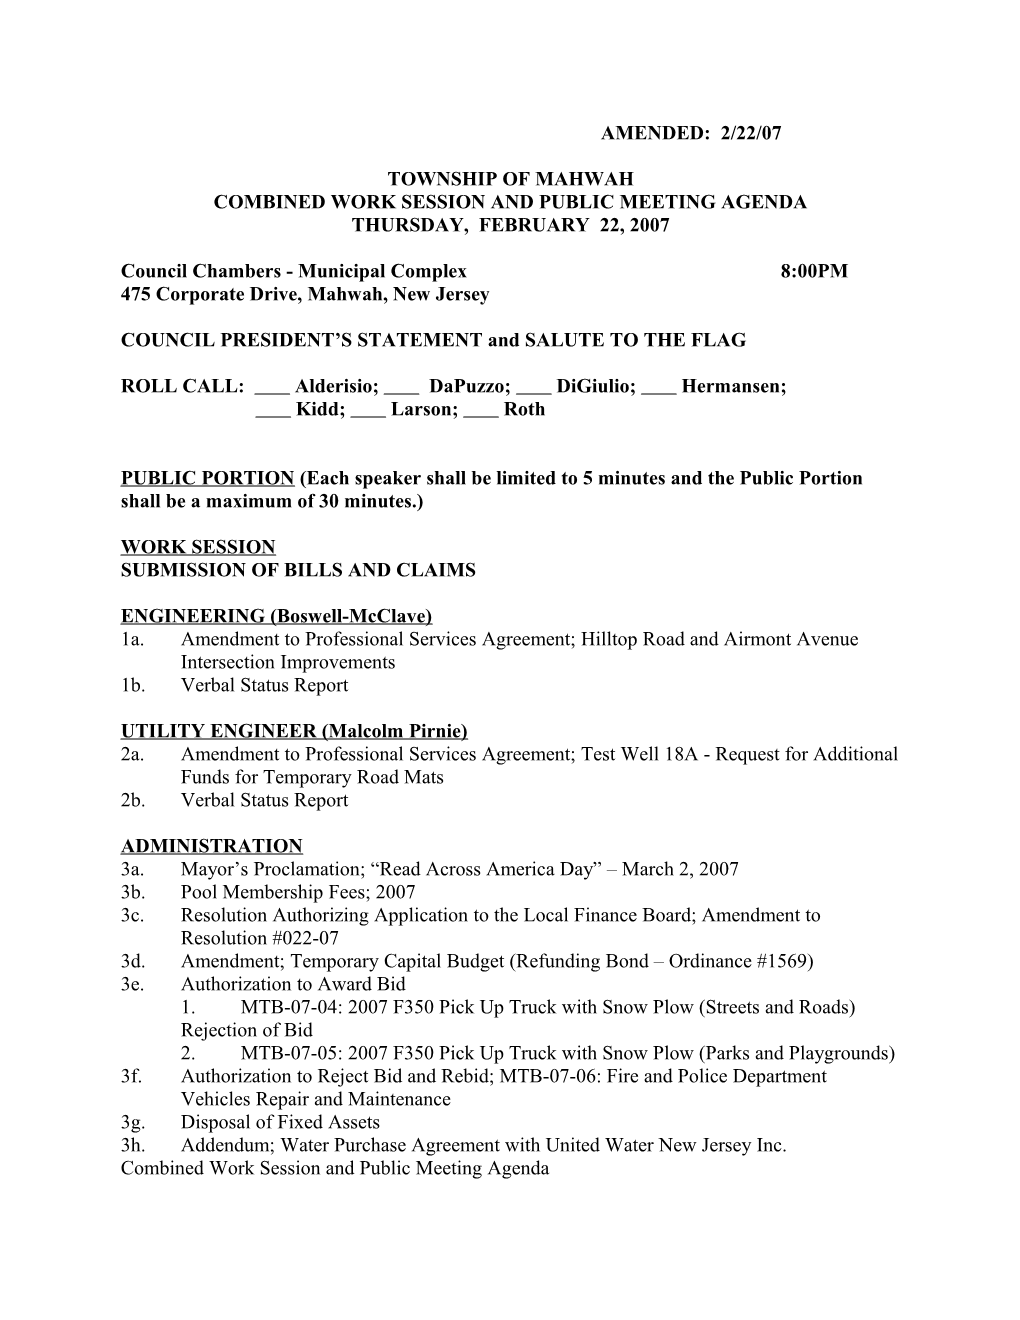 Combined Work Session and Public Meeting Agenda